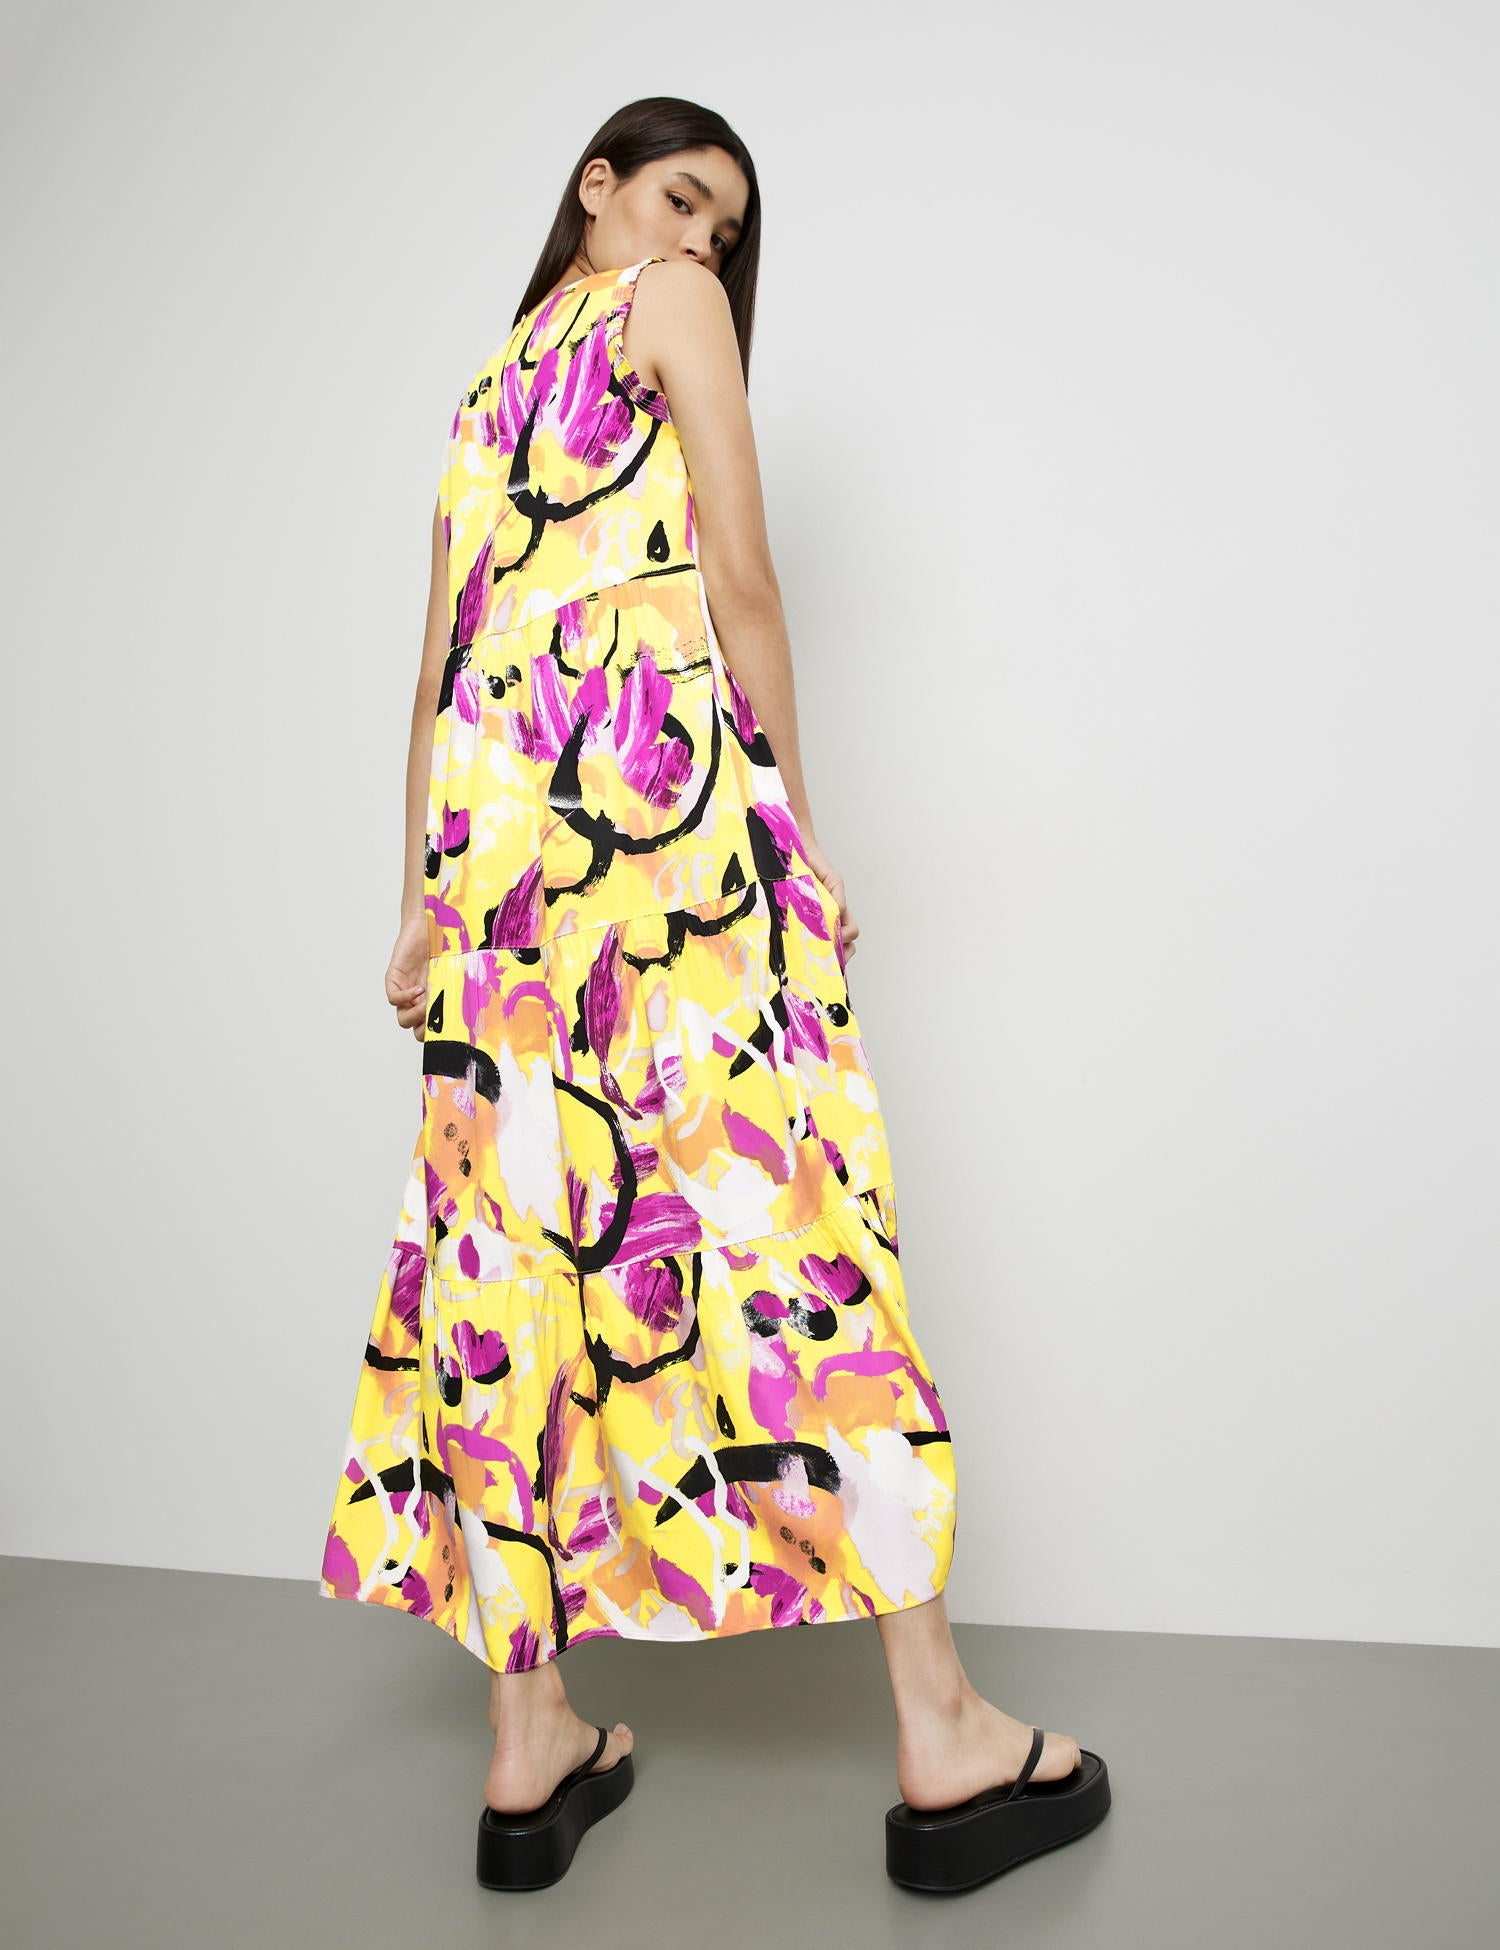 Sleeveless Maxi Dress With A Floral Print_580310-11019_4142_06